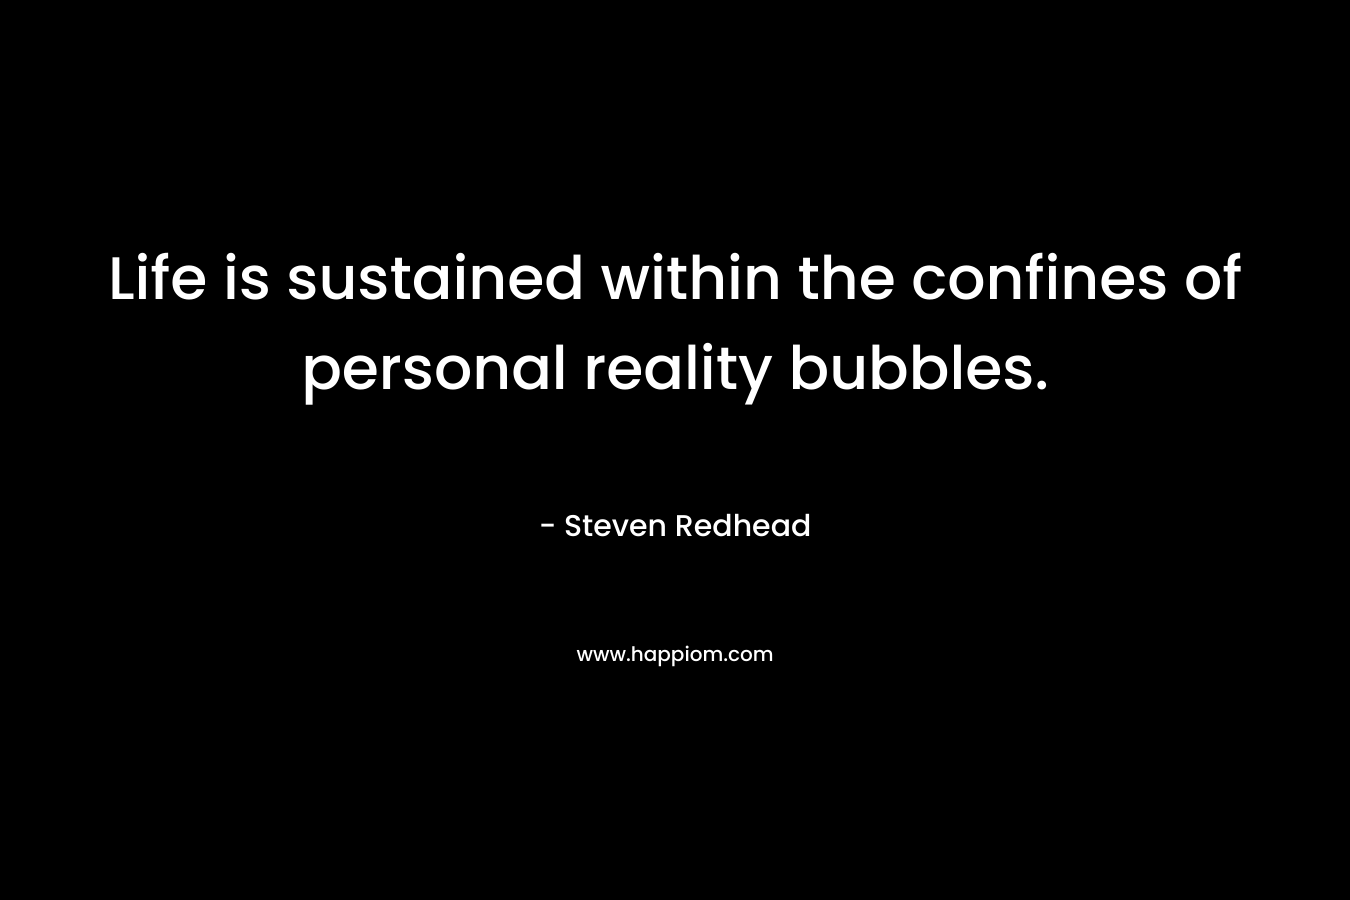 Life is sustained within the confines of personal reality bubbles. – Steven Redhead